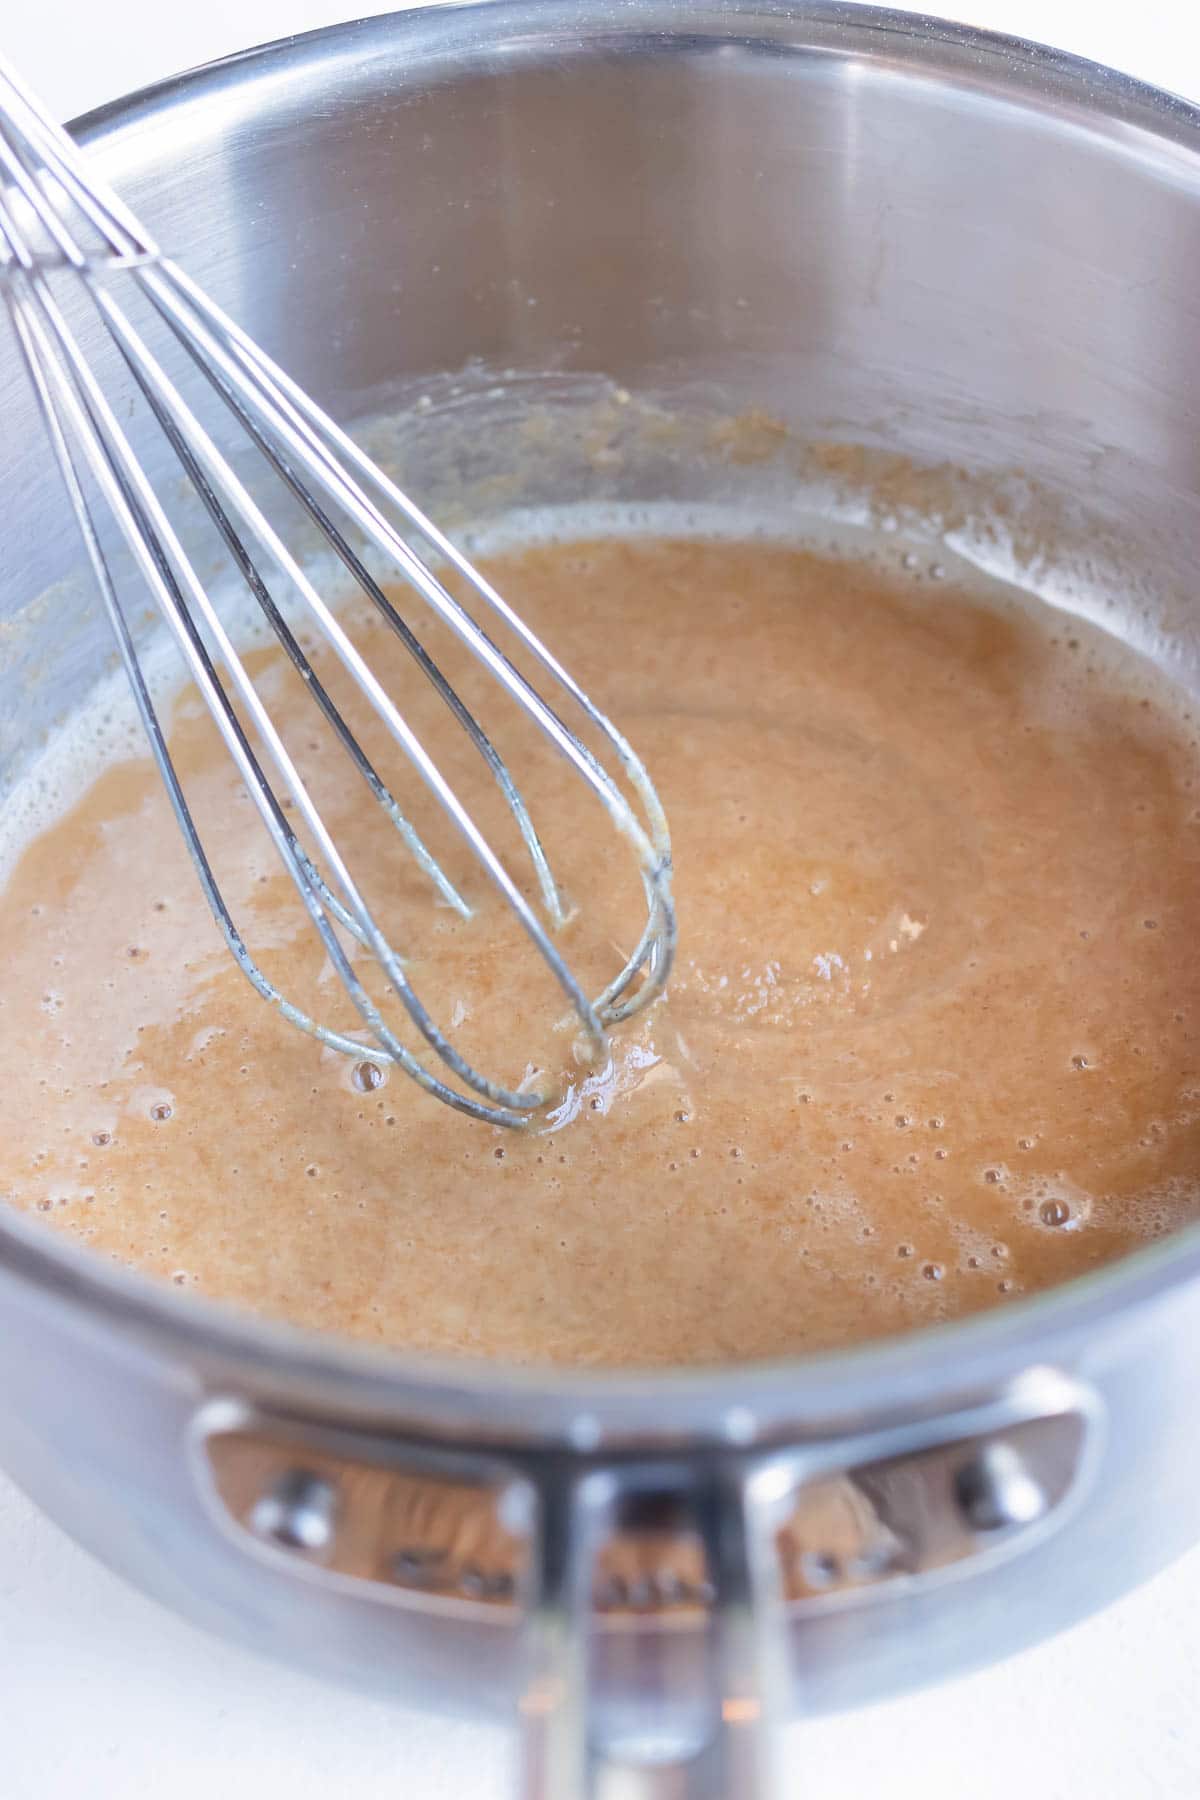 The roux ingredients are allowed to simmer while whisking throughout the cooking time.